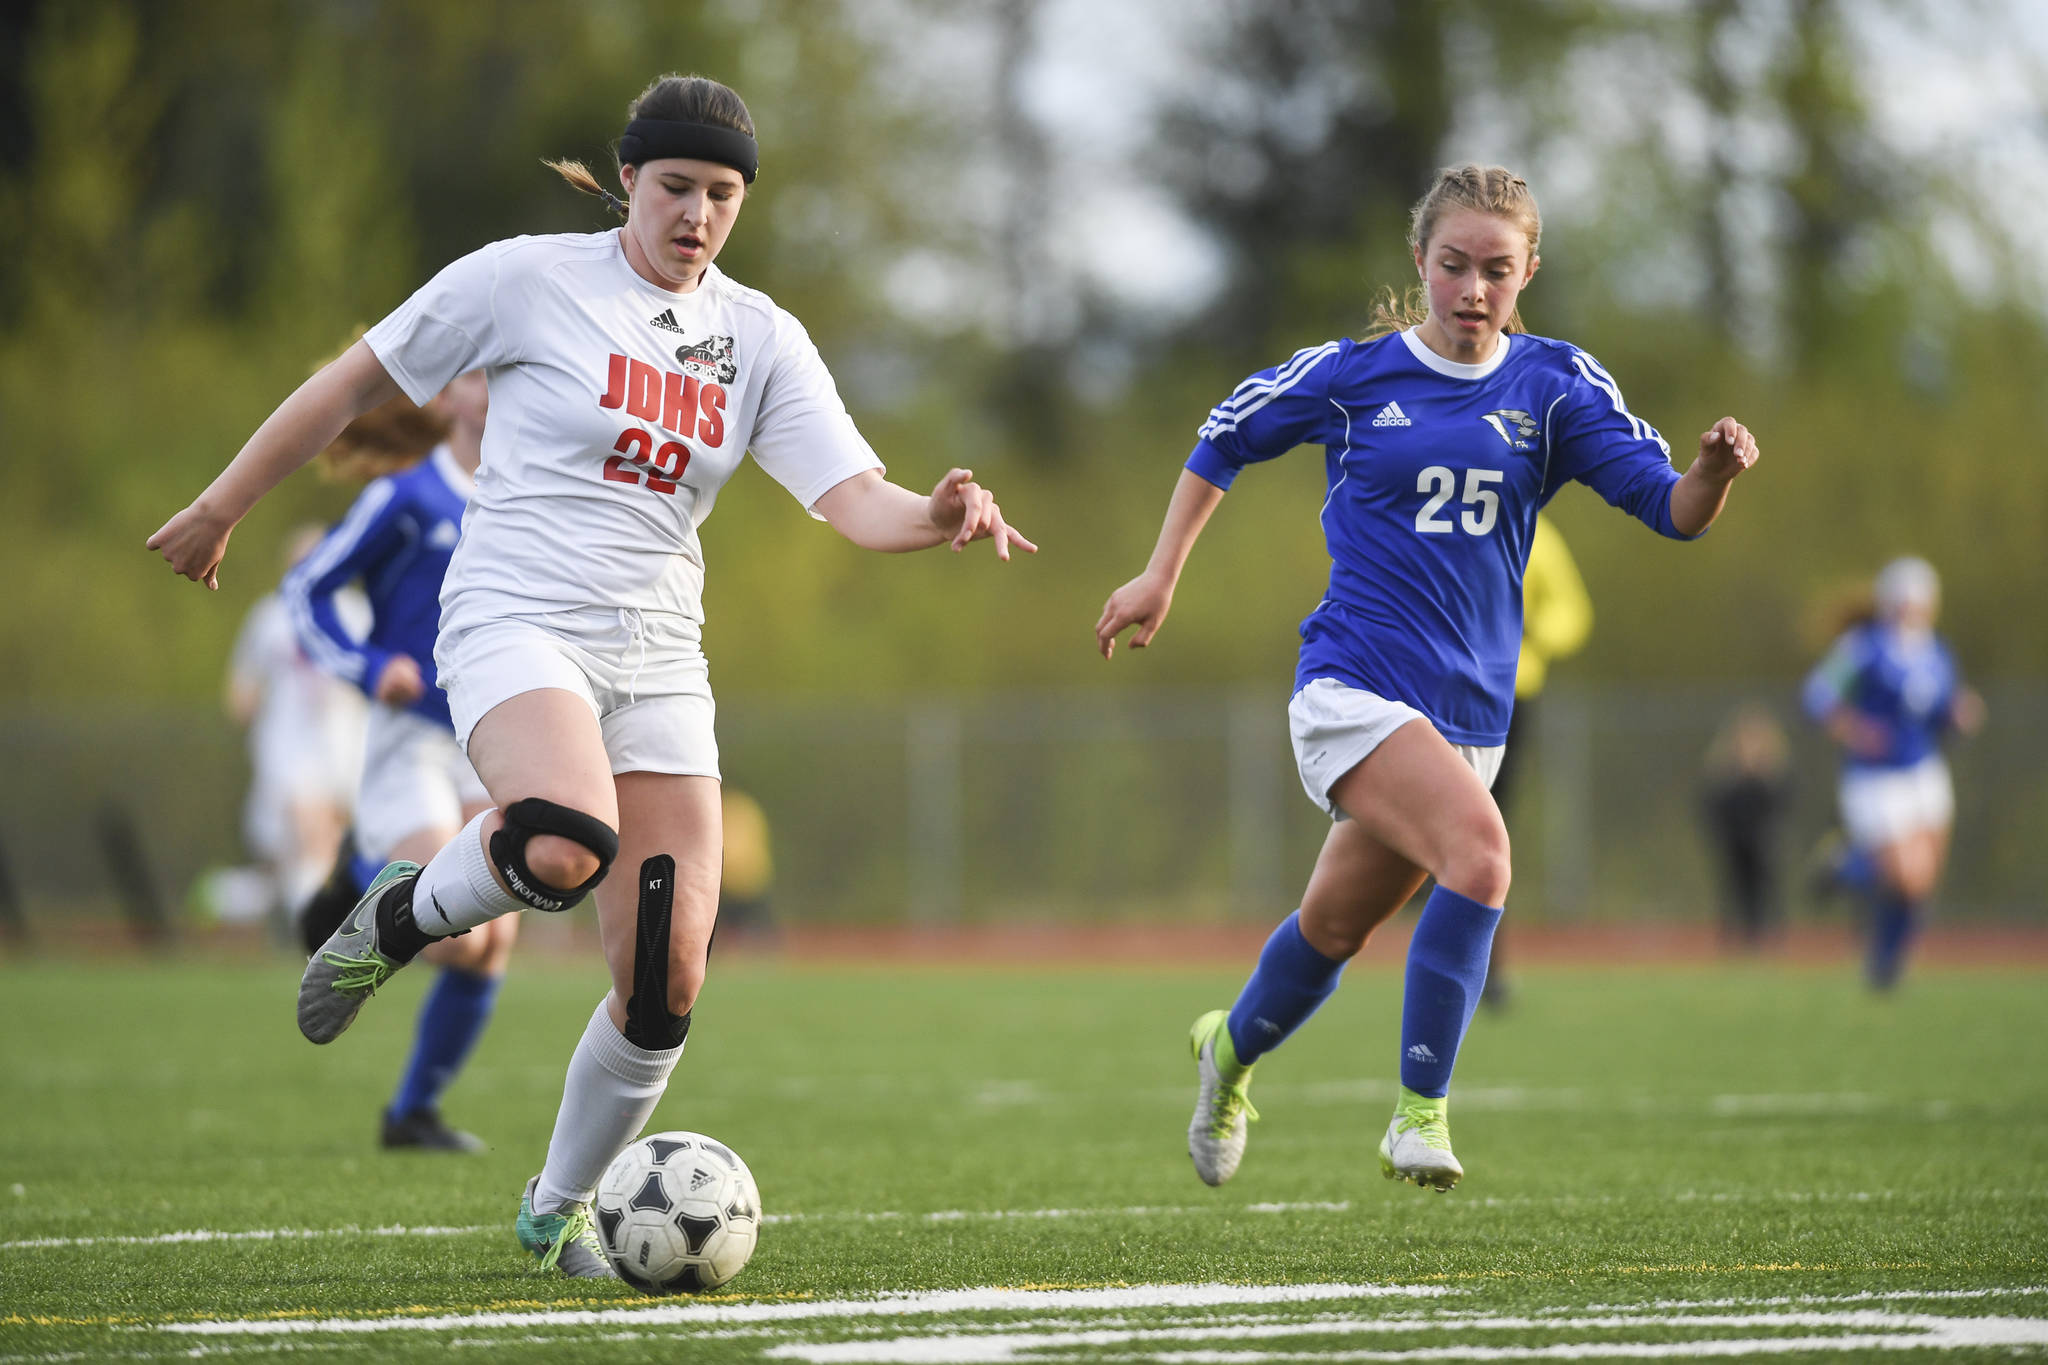 All four of Juneau’s soccer teams qualify for state